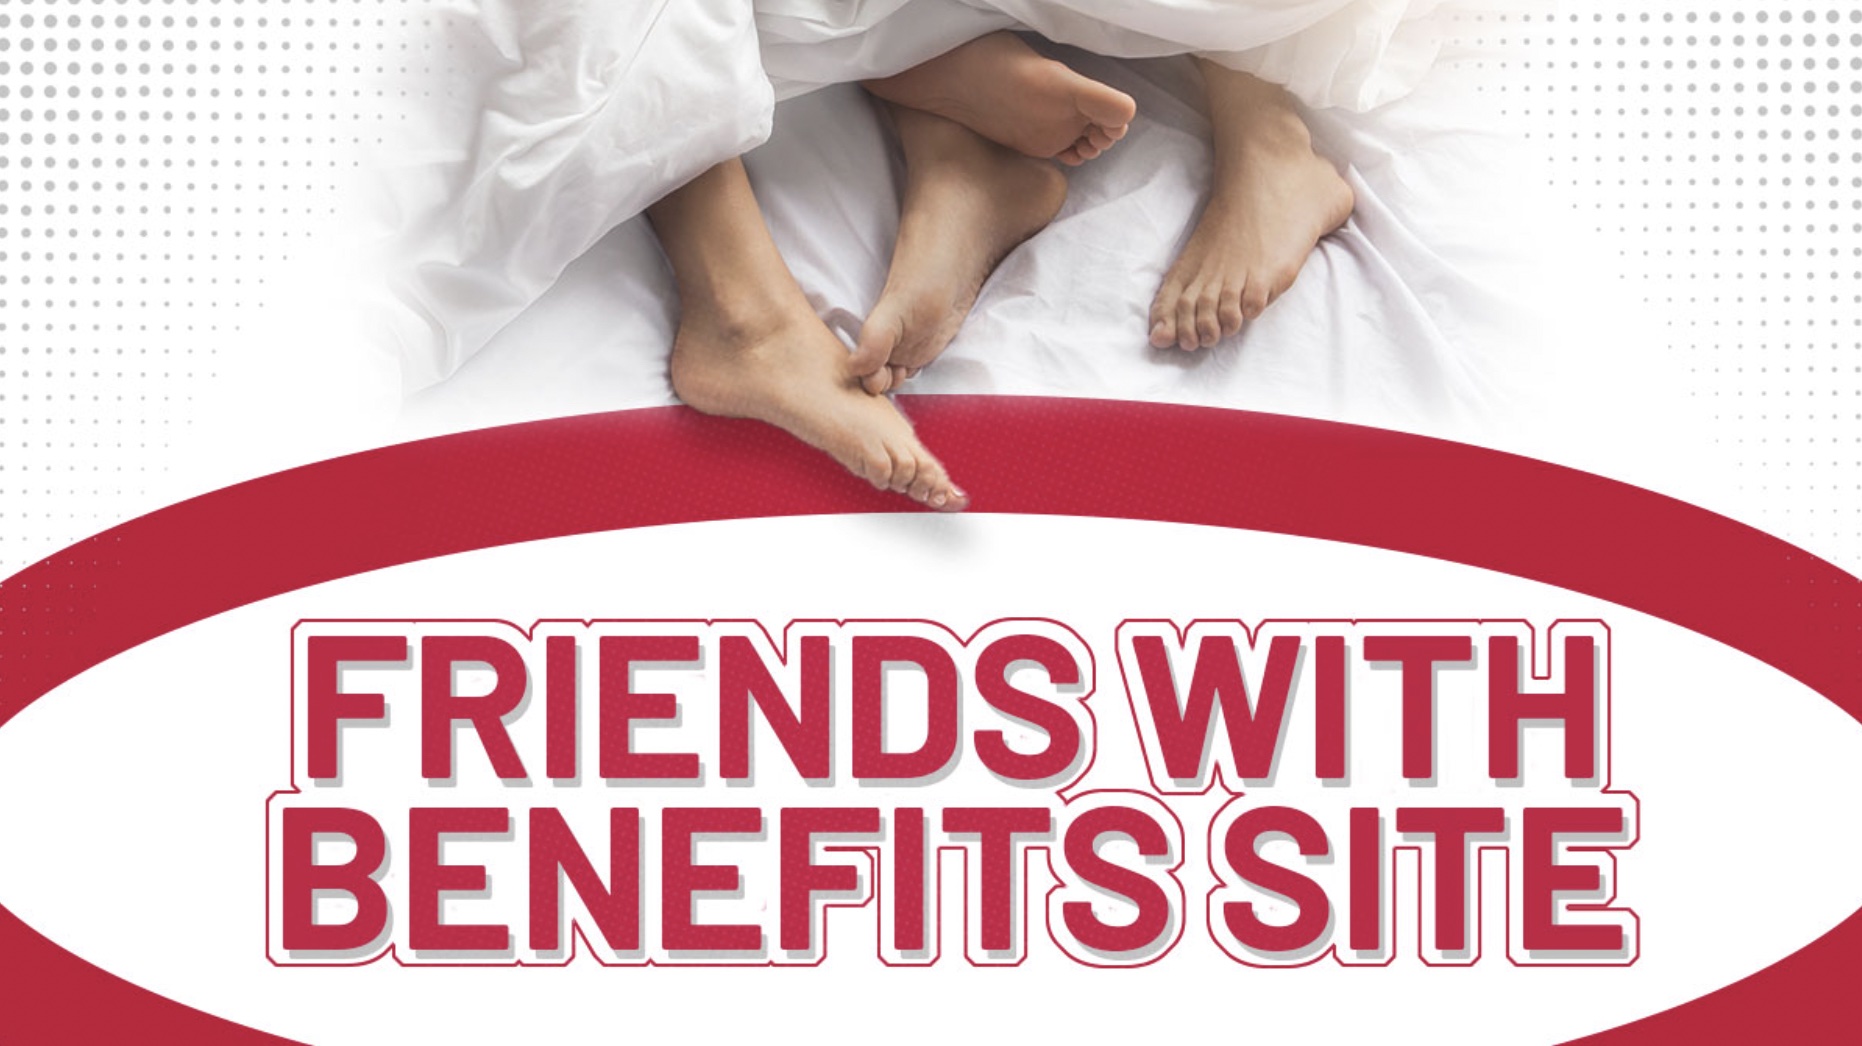 Top 6 Friends With Benefits Sites